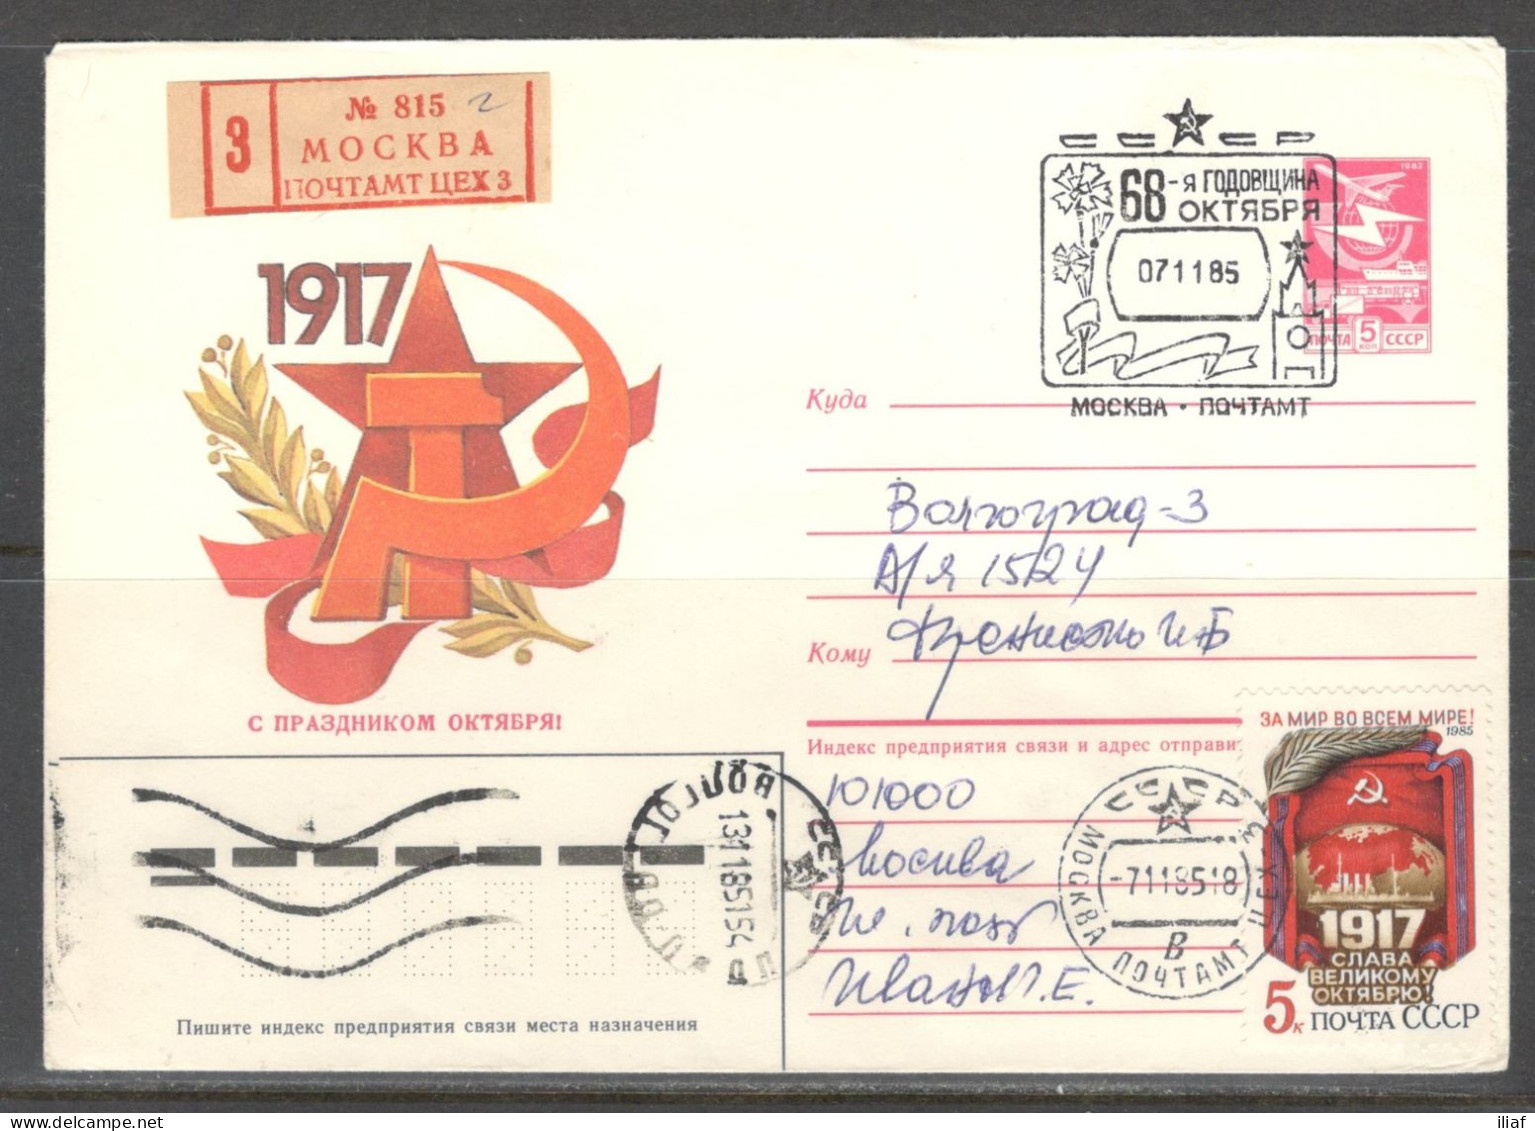 RUSSIA & USSR. 68th Anniversary Of The October Revolution.  Illustrated Envelope With Special Cancellation - Brieven En Documenten